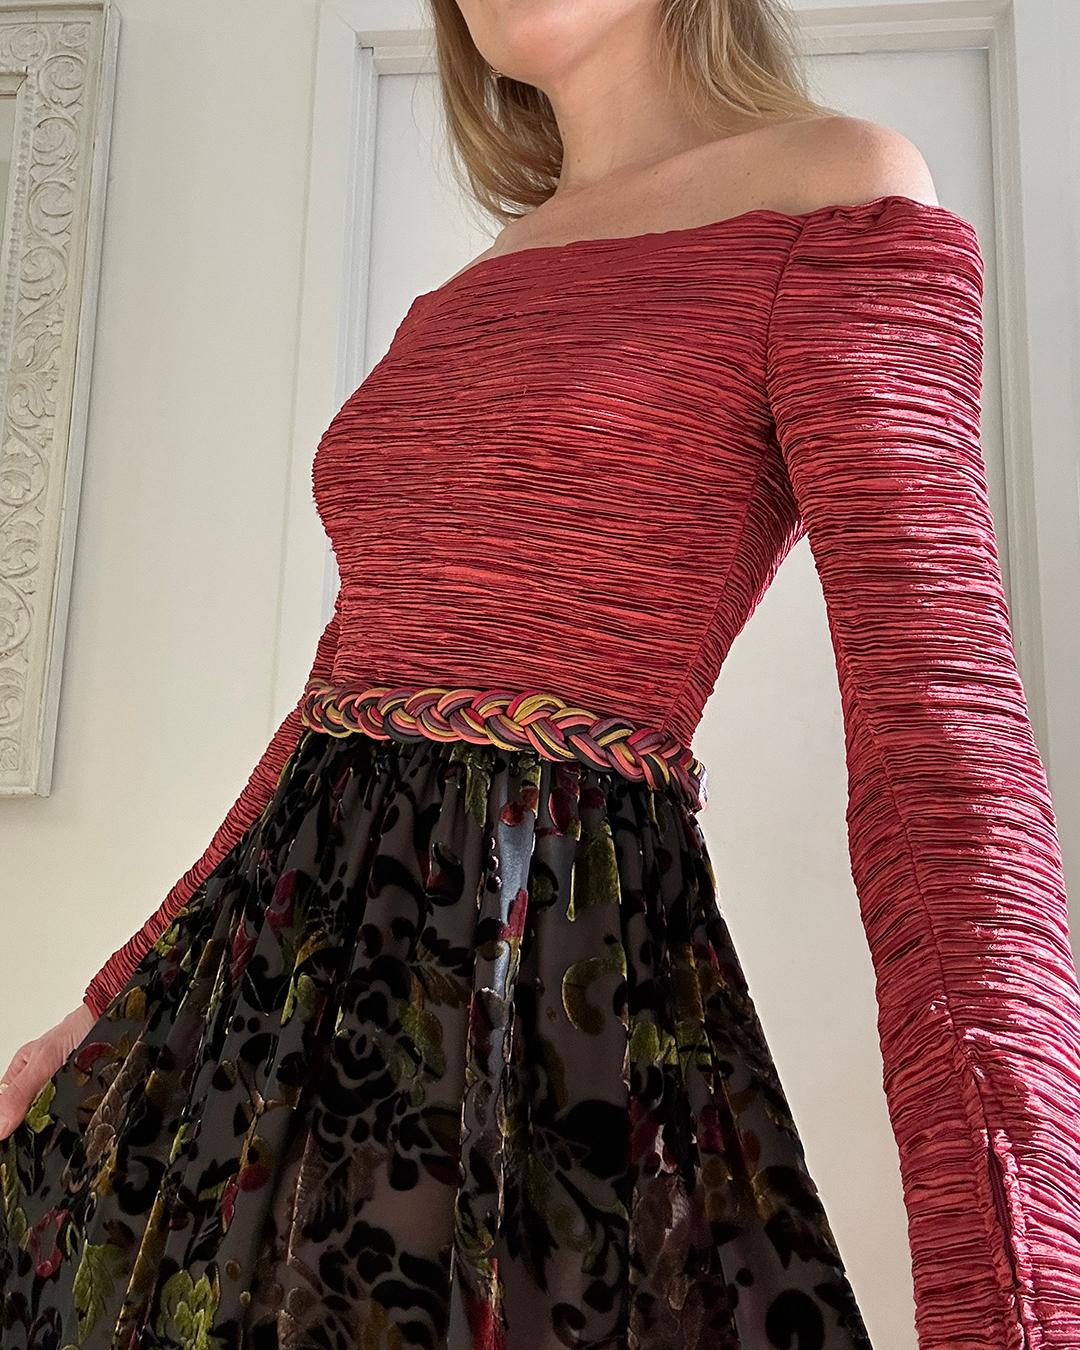 VERY BREEZY presents: This is truly one of the best Mary McFadden dresses I've ever come across— in all honesty, if it fit me better, I would hang onto it for my personal collection! Mary McFadden started her clothing label in the 1970s, and